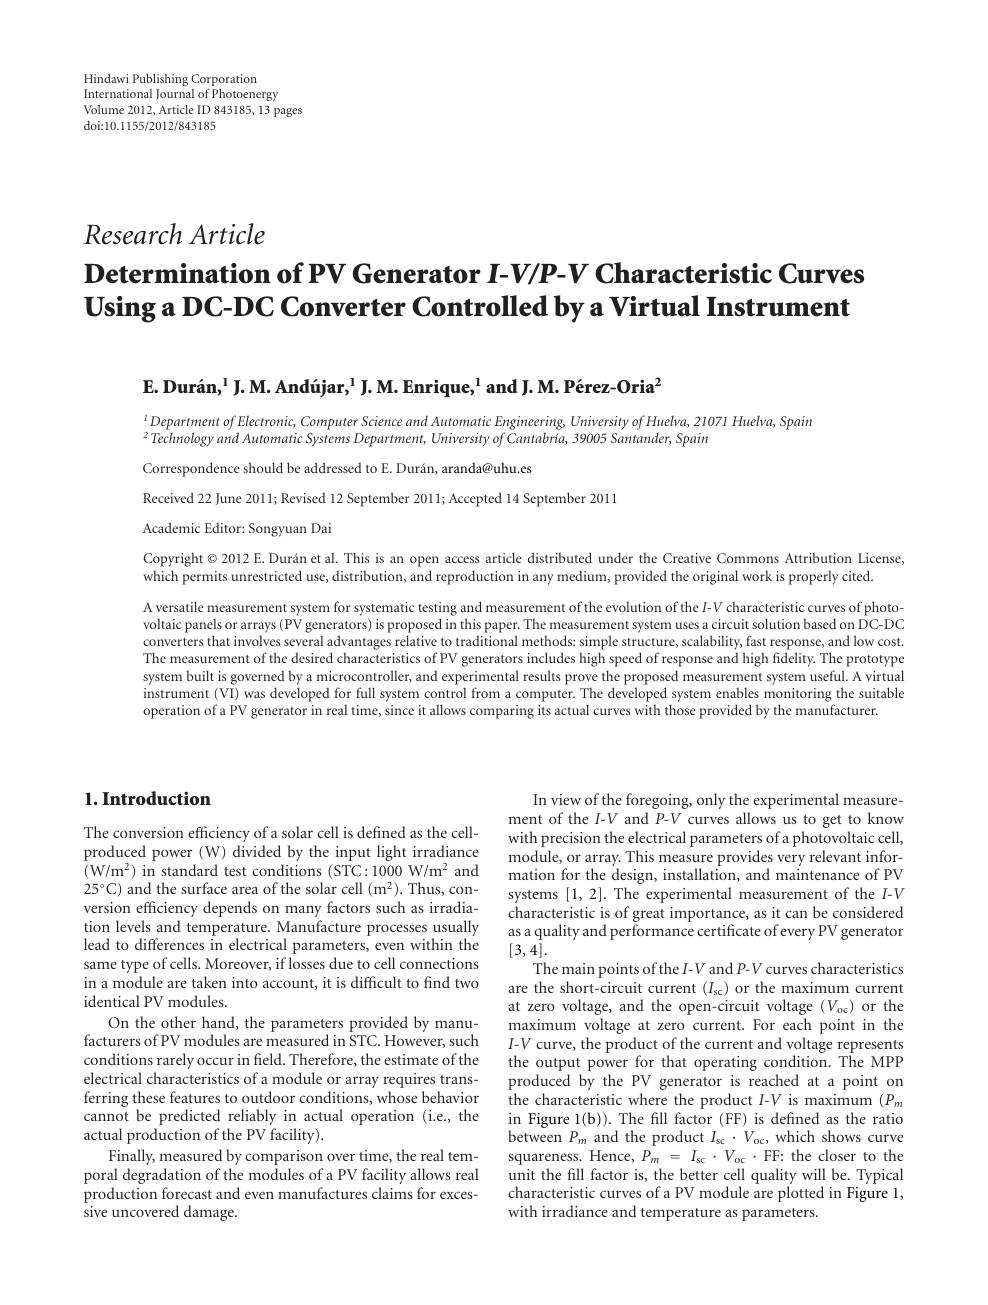 Determination Of Pv Generator I V P V Characteristic Curves Using A Dc Dc Converter Controlled By A Virtual Instrument Topic Of Research Paper In Electrical Engineering Electronic Engineering Information Engineering Download Scholarly Article Pdf